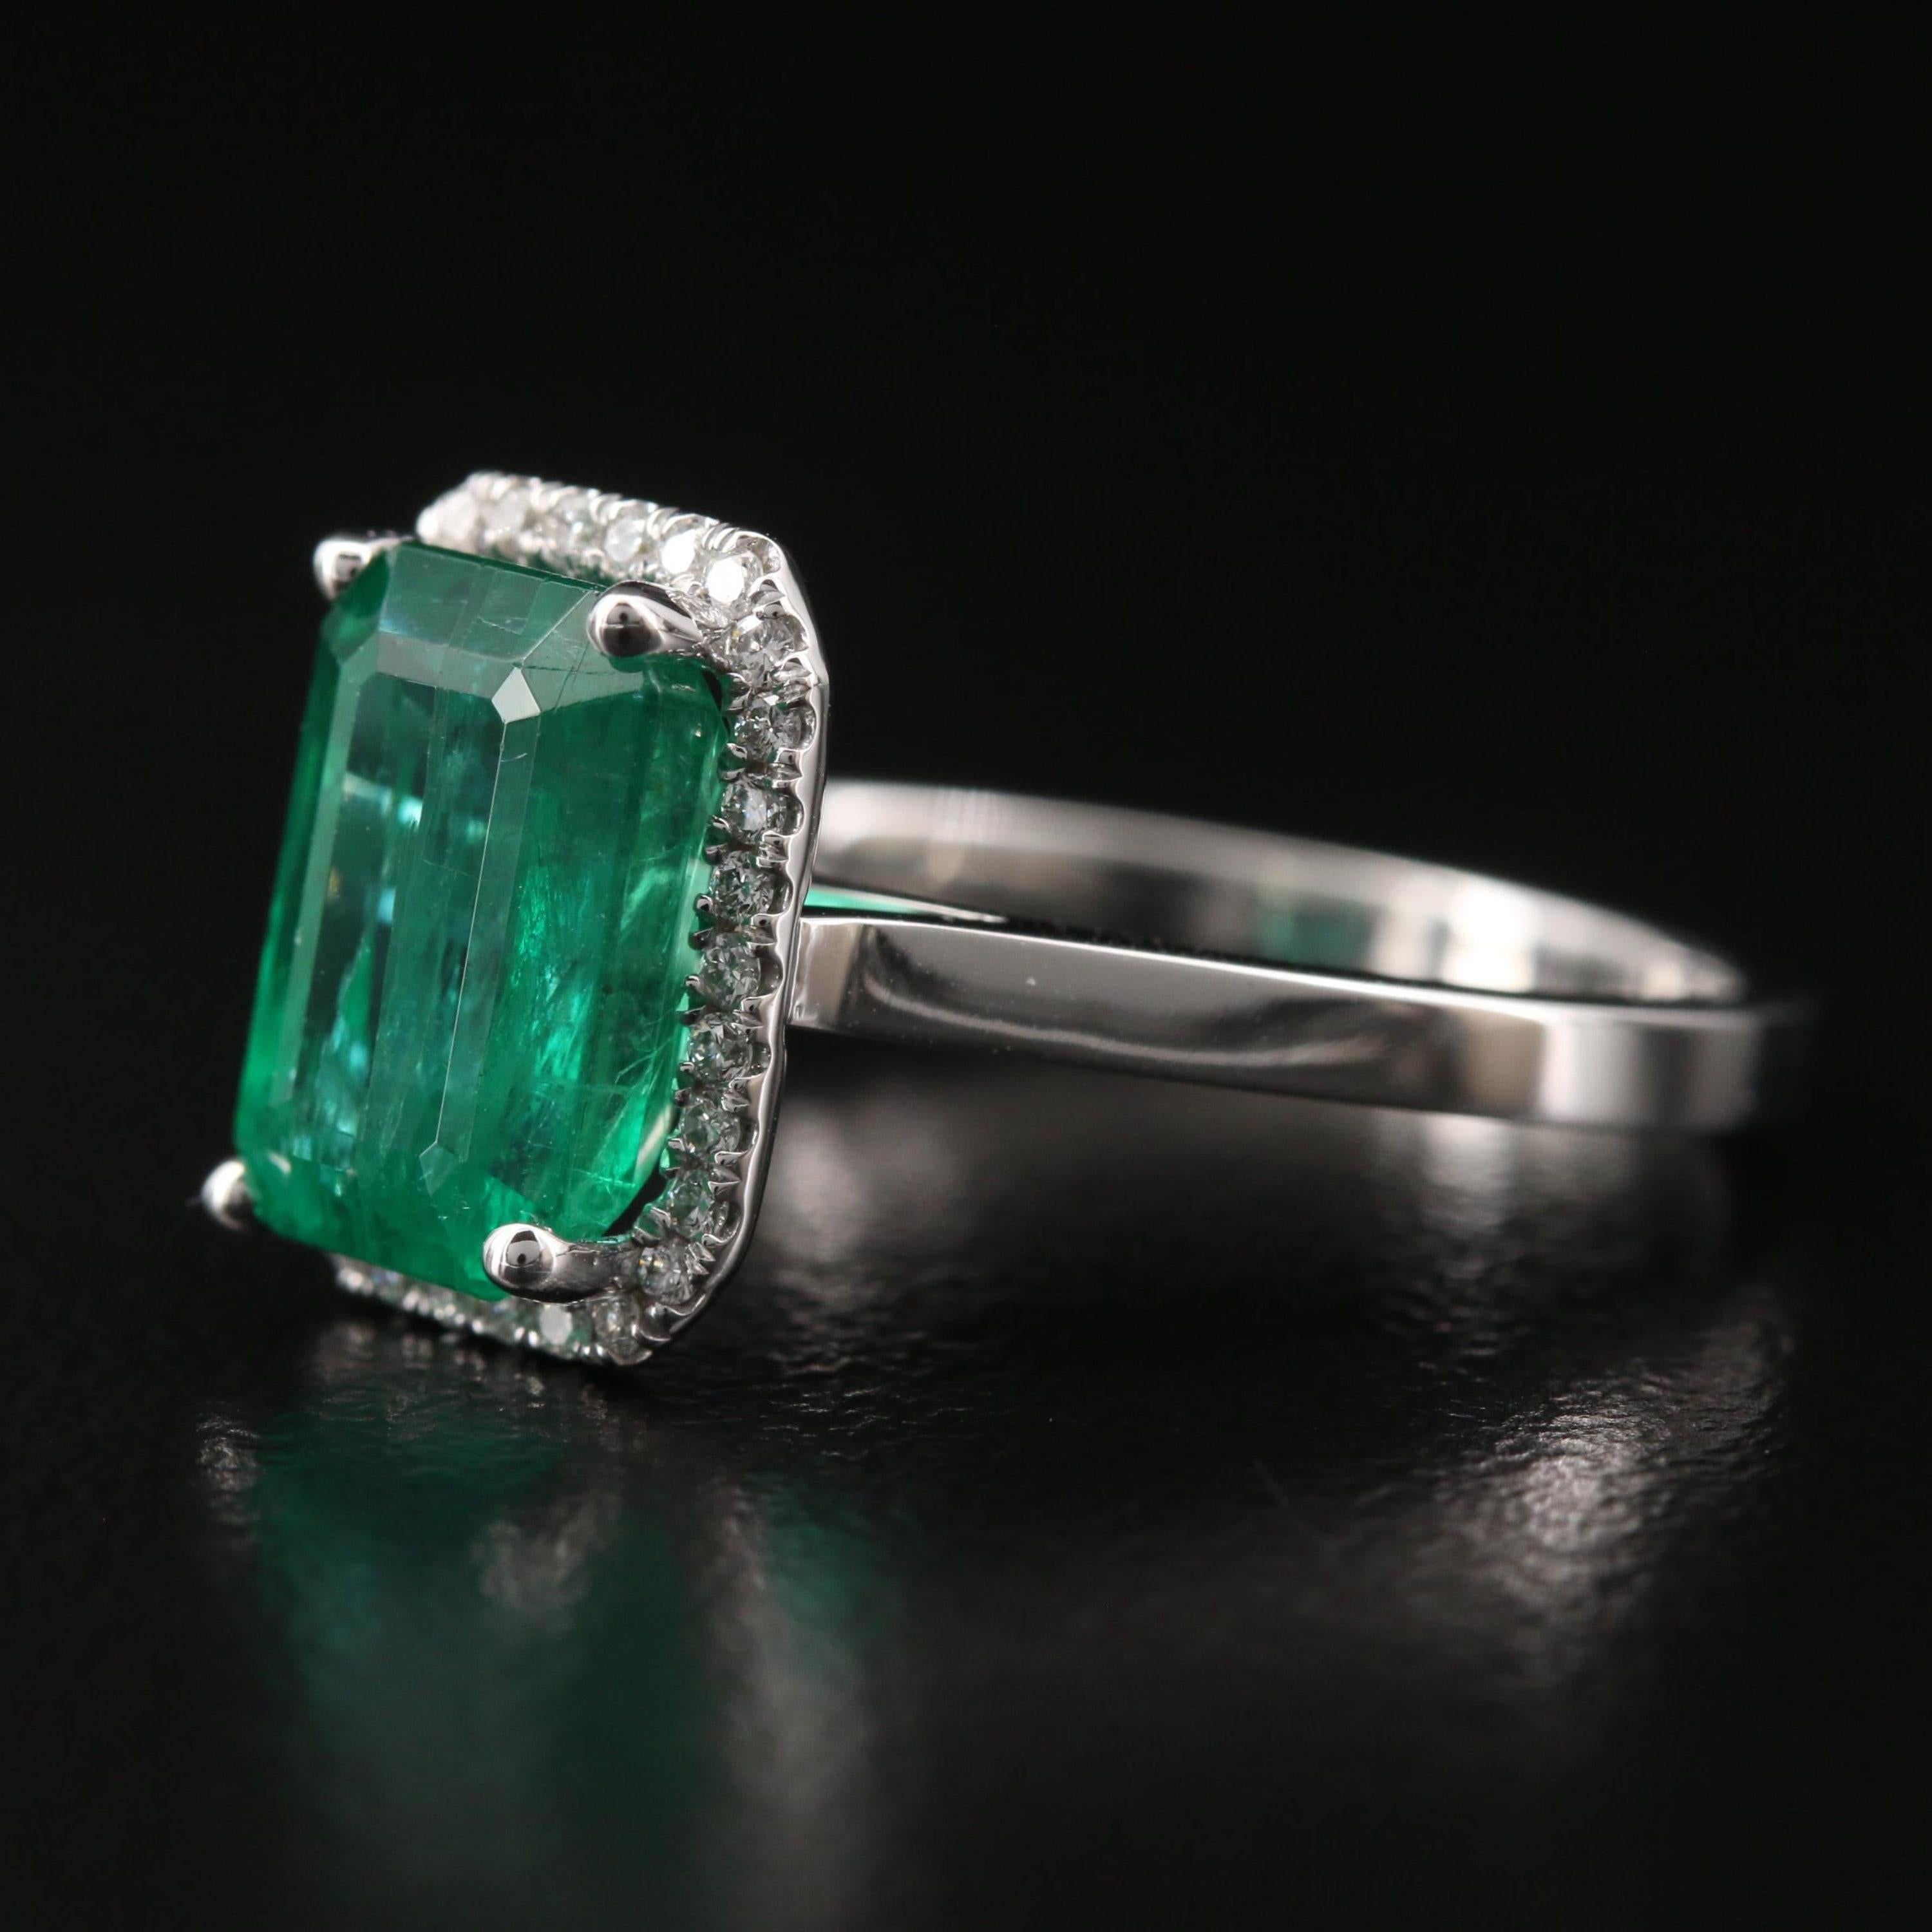 For Sale:  2.8 Carat Halo Emerald Engagement Ring, Emerald Wedding Ring Cocktail Ring 2